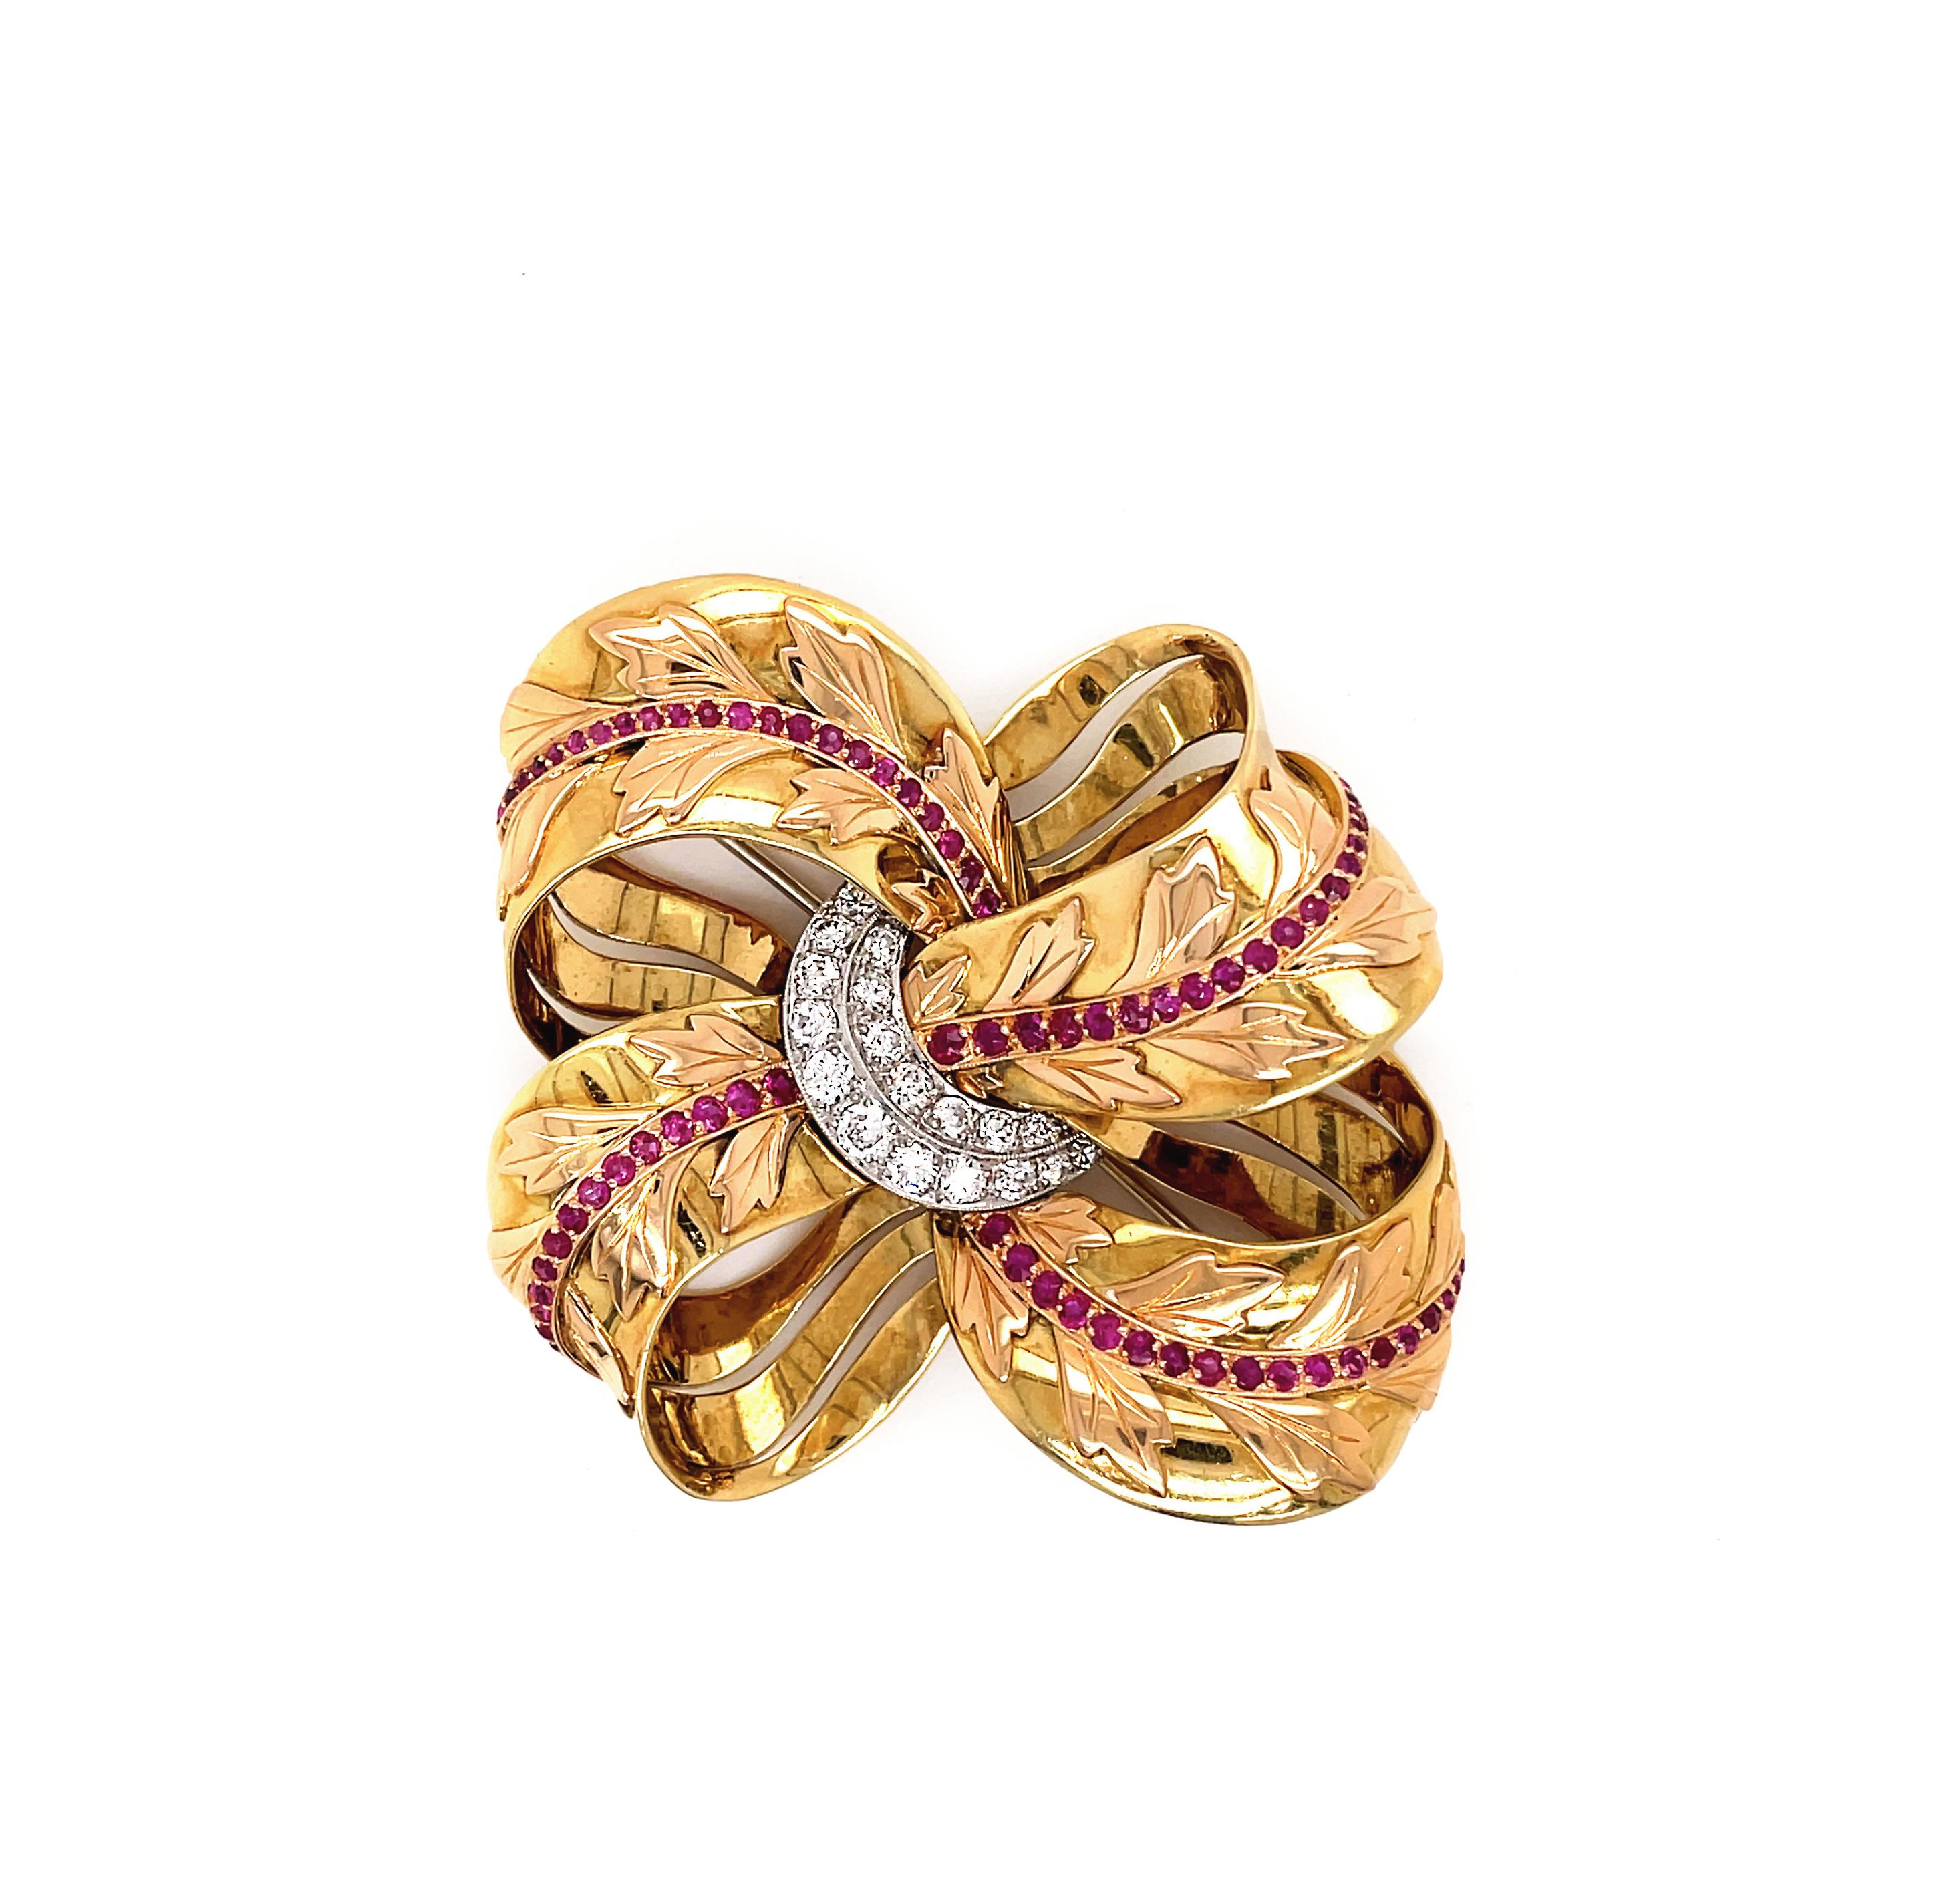 This original 1950's yellow gold vintage ribbon brooch is beautifully decorated with a rose gold contrasting leaf motif, centrally lined through each loop with 76 vibrant rubies totalling to an approximate weight of 1.30ct. Entwined in the centre is